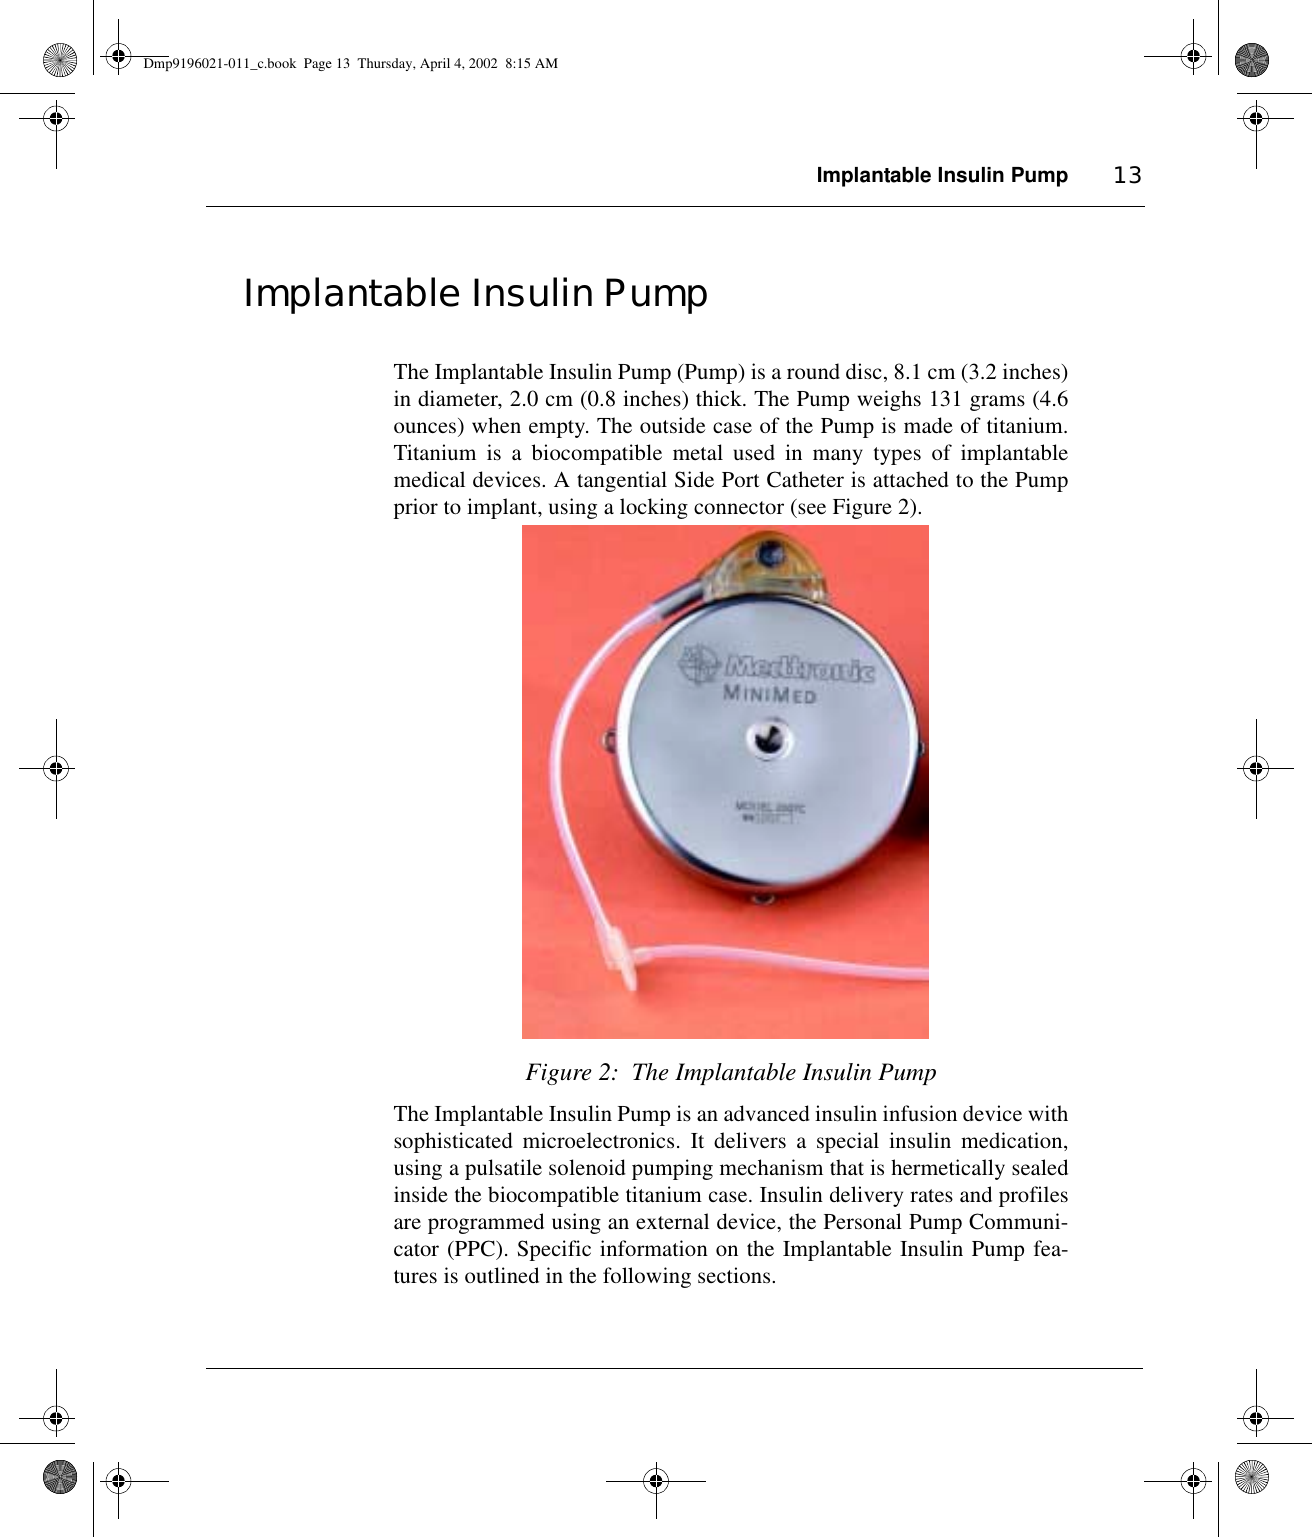 Implantable Insulin Pump 13Implantable Insulin PumpThe Implantable Insulin Pump (Pump) is a round disc, 8.1 cm (3.2 inches)in diameter, 2.0 cm (0.8 inches) thick. The Pump weighs 131 grams (4.6ounces) when empty. The outside case of the Pump is made of titanium.Titanium is a biocompatible metal used in many types of implantablemedical devices. A tangential Side Port Catheter is attached to the Pumpprior to implant, using a locking connector (see Figure 2).Figure 2:  The Implantable Insulin PumpThe Implantable Insulin Pump is an advanced insulin infusion device withsophisticated microelectronics. It delivers a special insulin medication,using a pulsatile solenoid pumping mechanism that is hermetically sealedinside the biocompatible titanium case. Insulin delivery rates and profilesare programmed using an external device, the Personal Pump Communi-cator (PPC). Specific information on the Implantable Insulin Pump fea-tures is outlined in the following sections. Dmp9196021-011_c.book  Page 13  Thursday, April 4, 2002  8:15 AM